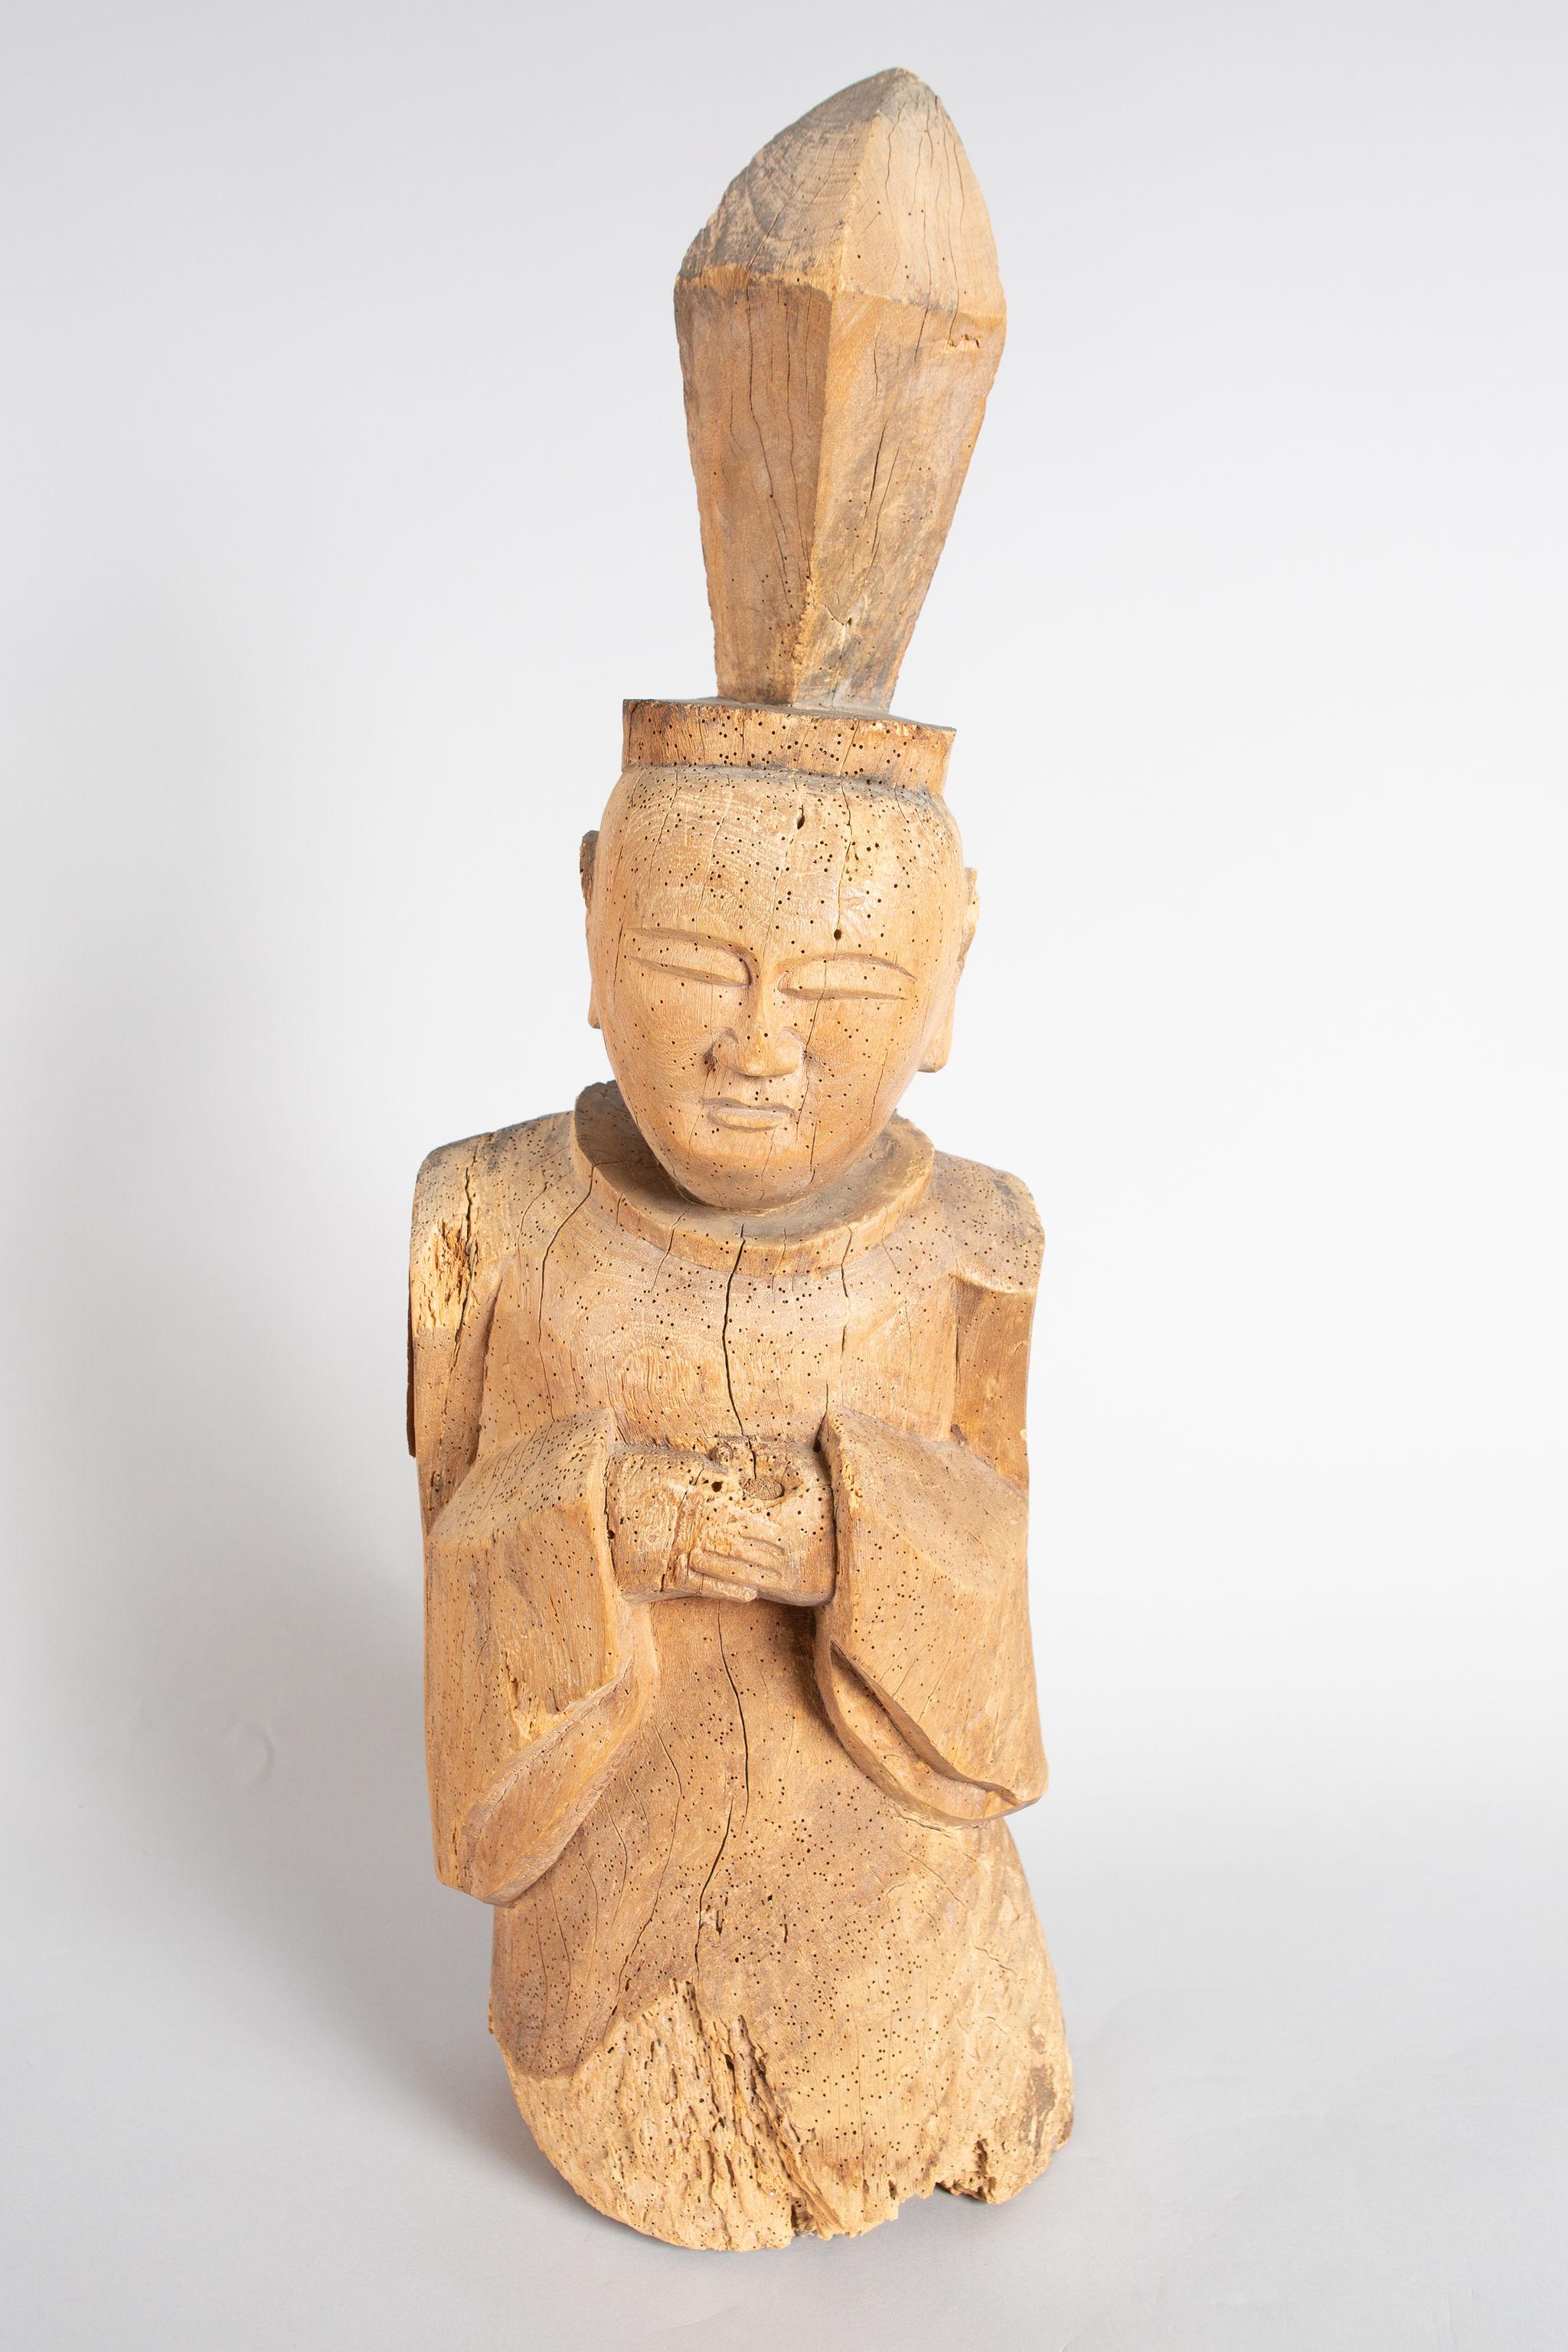 Shinto carving of figure referred to as Father Japan. Heian period (794 to 1185) sculpture made of hinoki wood in single piece construction called ichiboku zukuri.